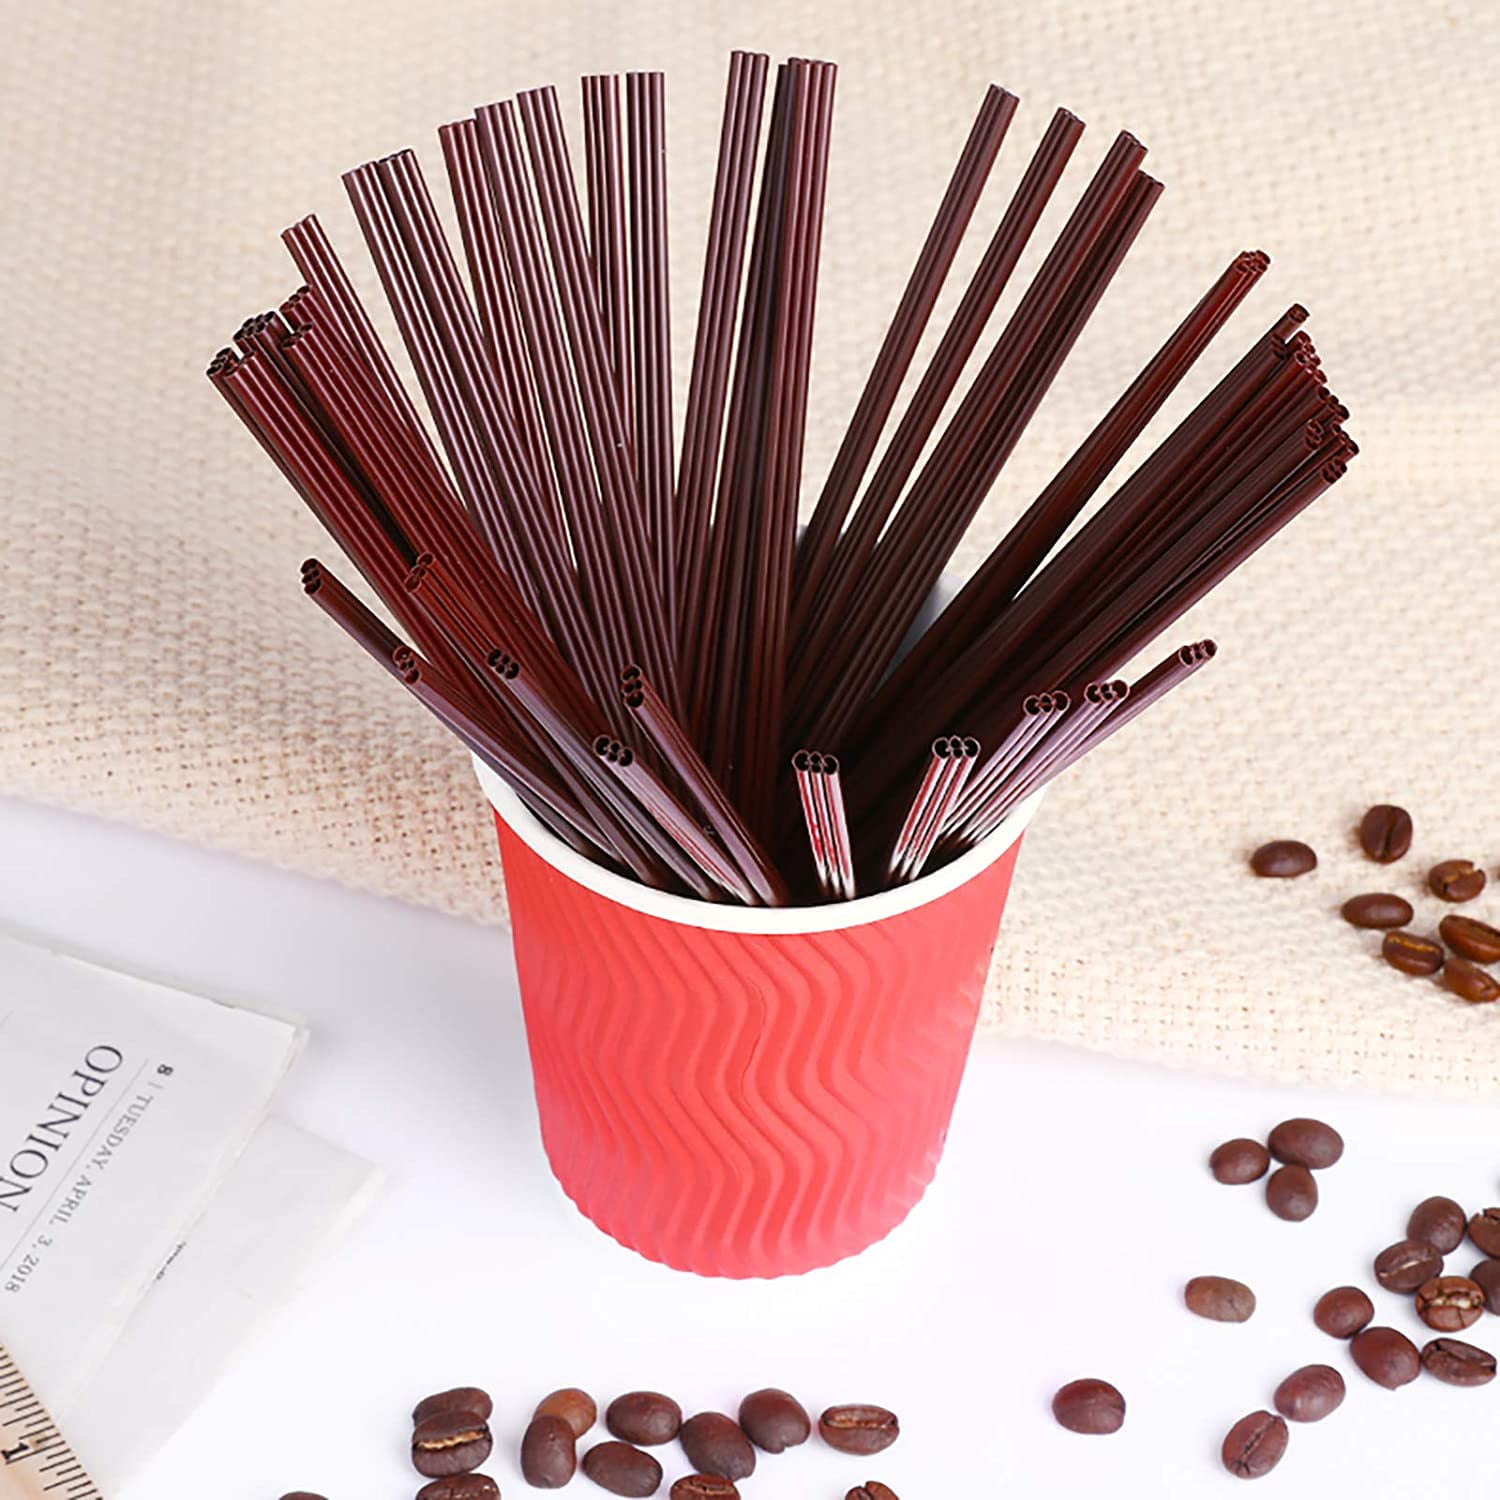 Coffee Stirrers Sticks,Disposable Wooden Coffee Stick Beverage Stirrers,  Suitable For Coffee Nook Tea Drinks and Bartending, 7 Inches,200 Sticks.